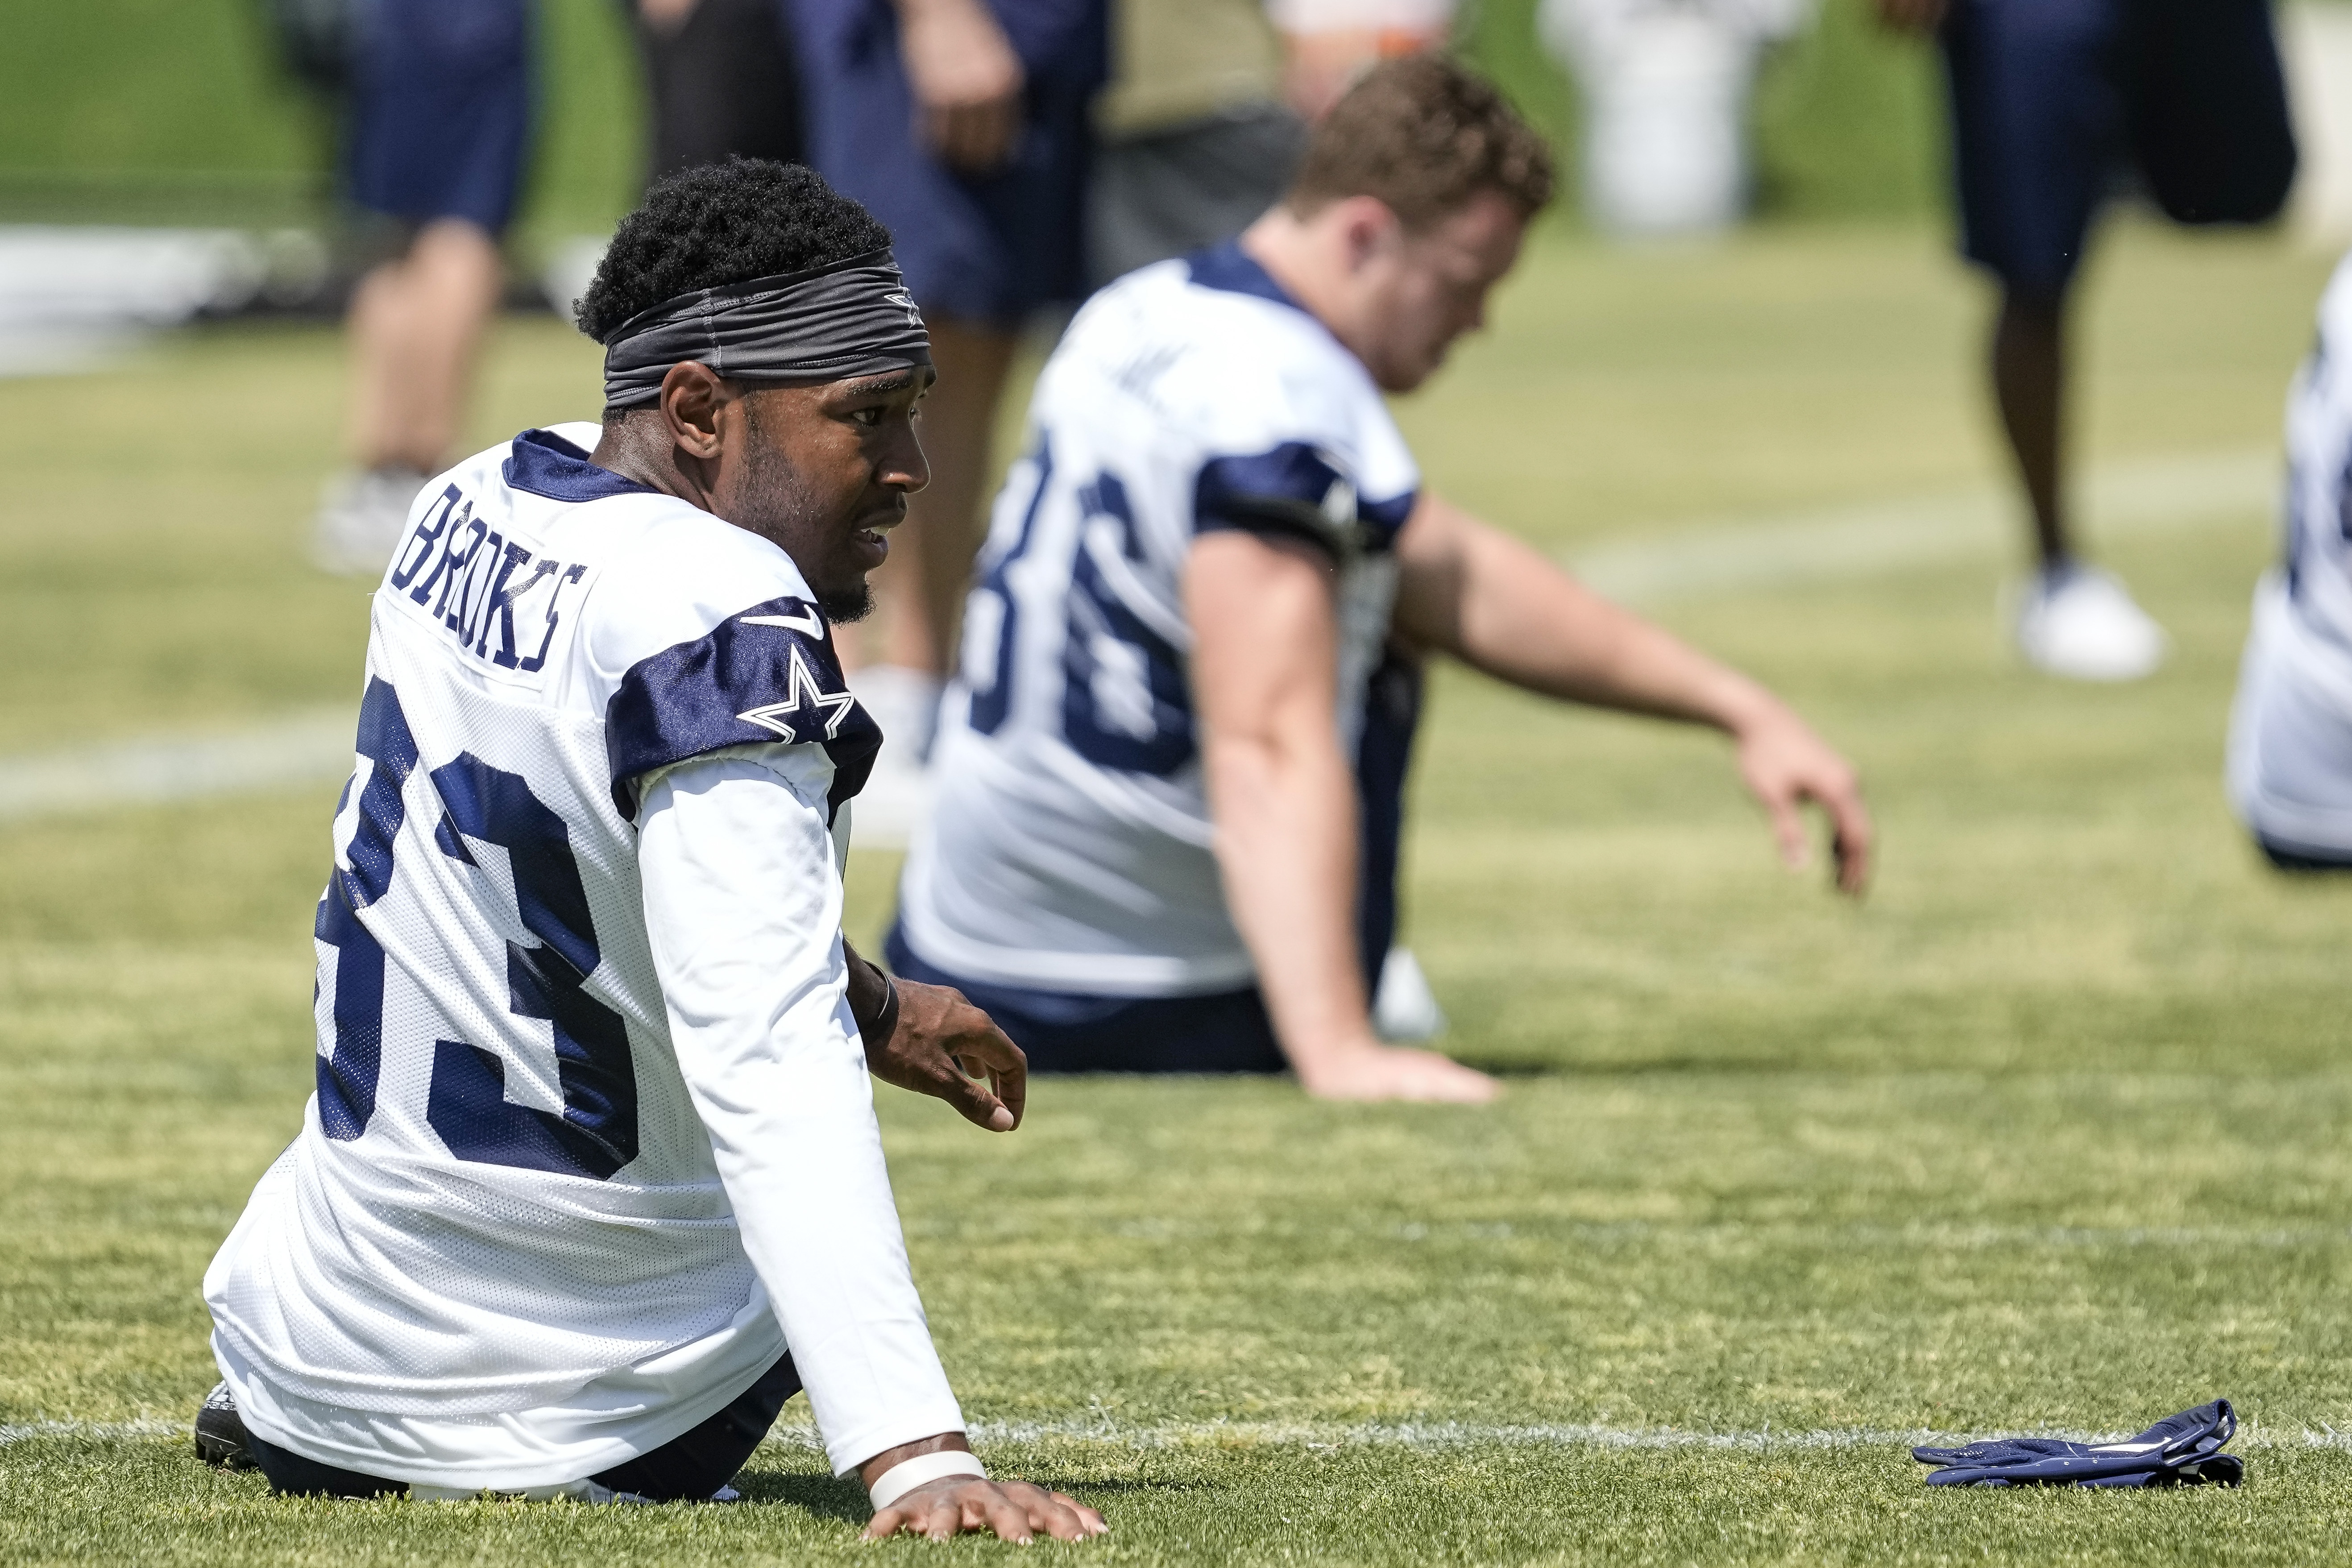 In a reversal from past Cowboys rookie minicamps, Dallas takes new